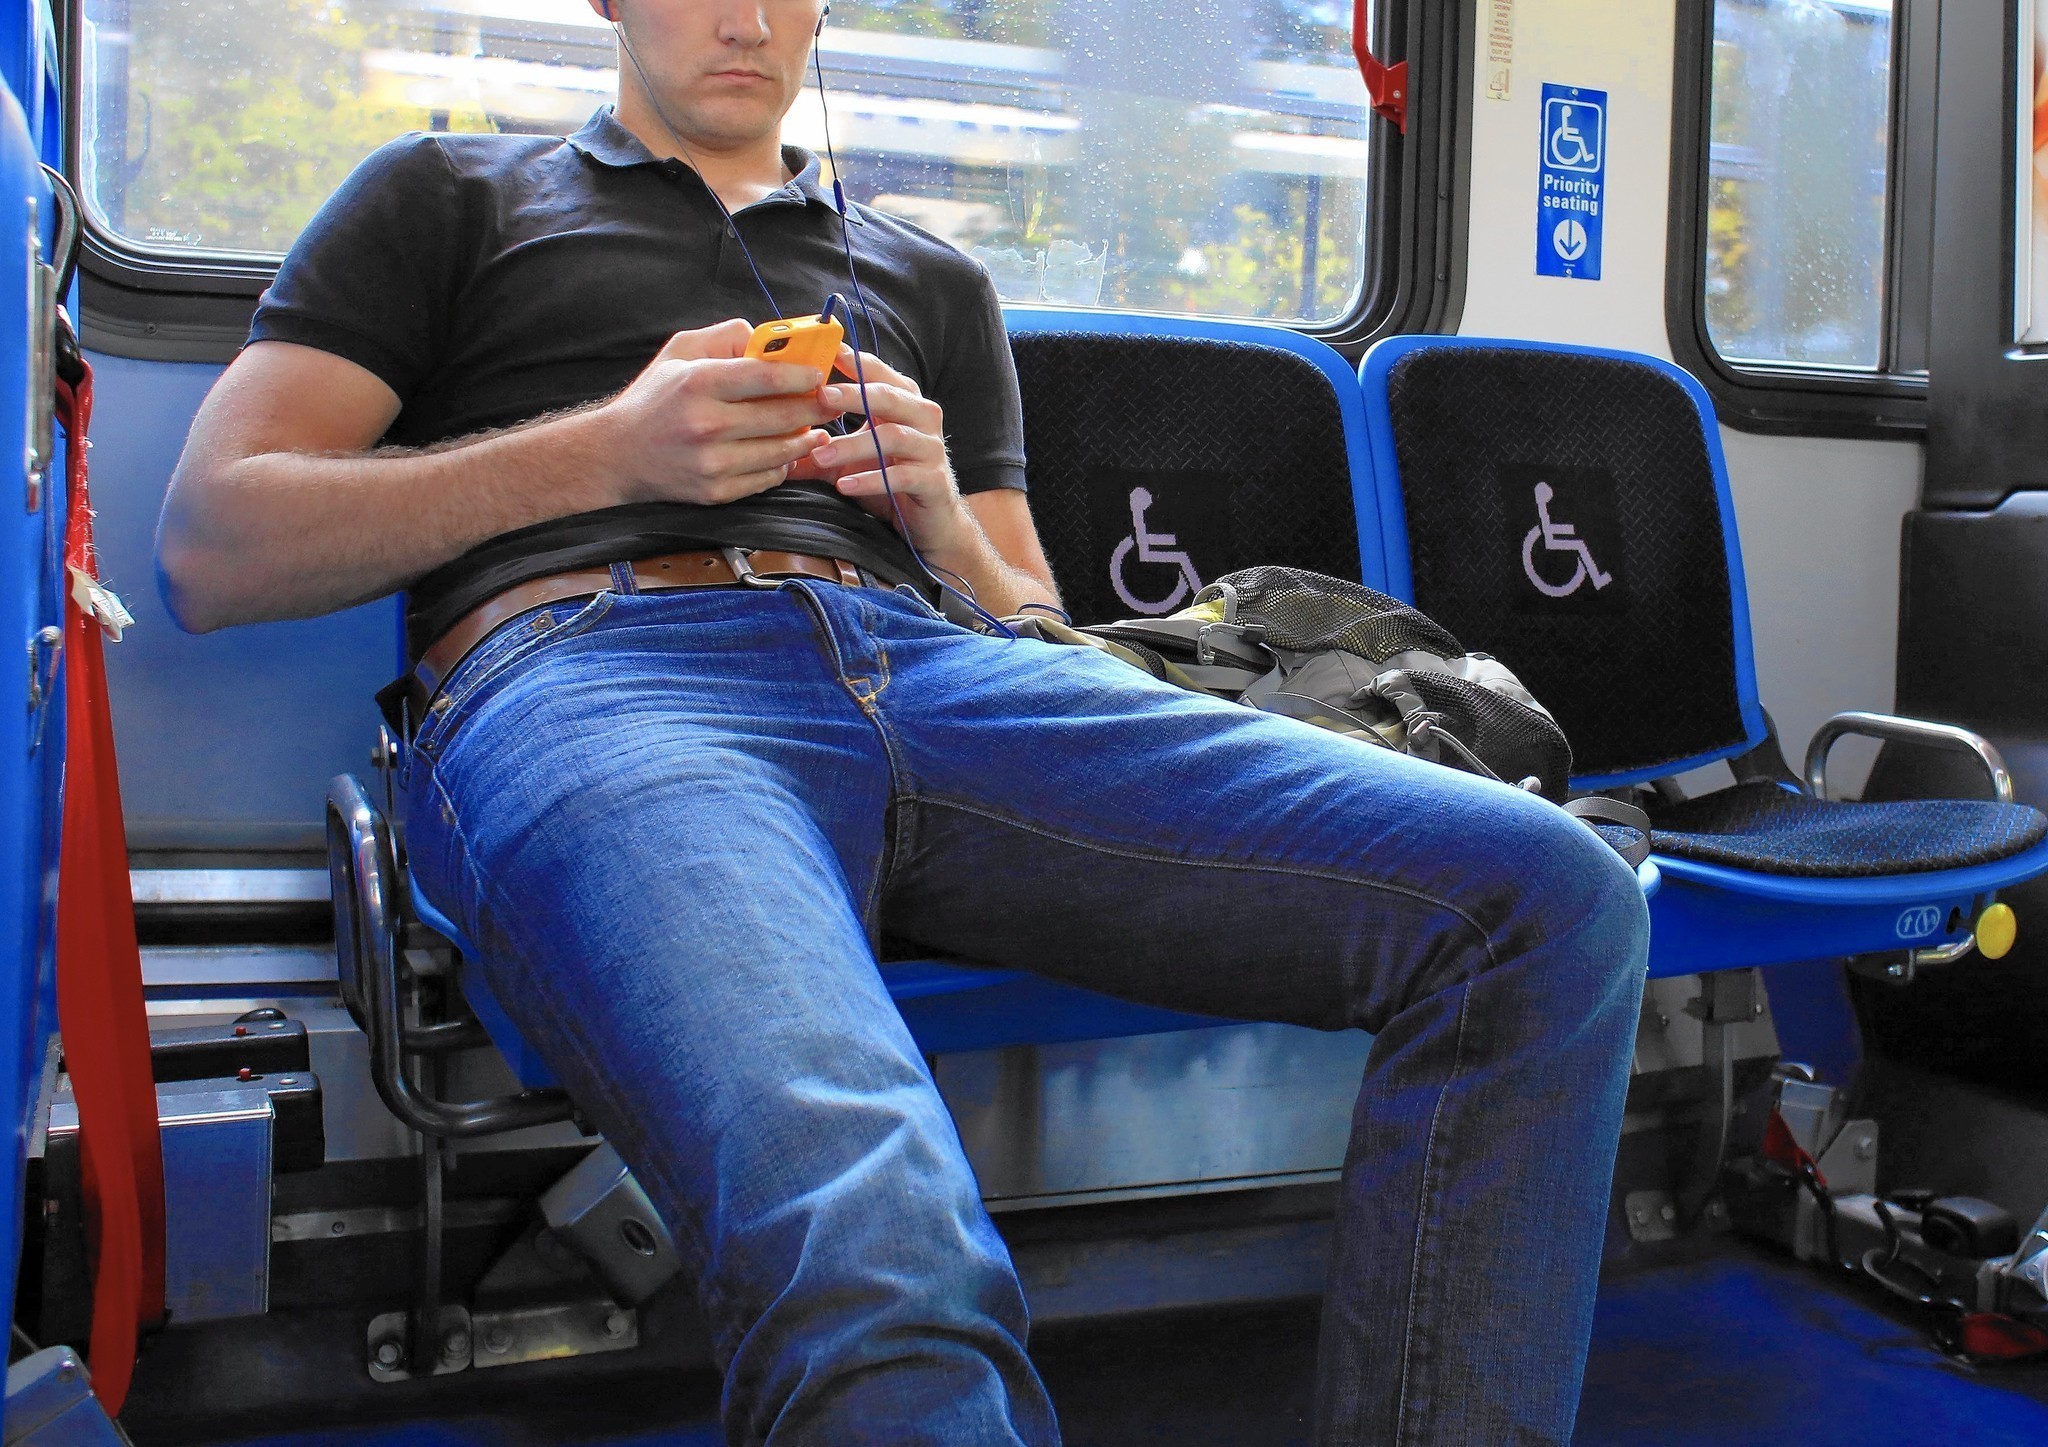 CTA riders debate 'manspreading' and bad manners